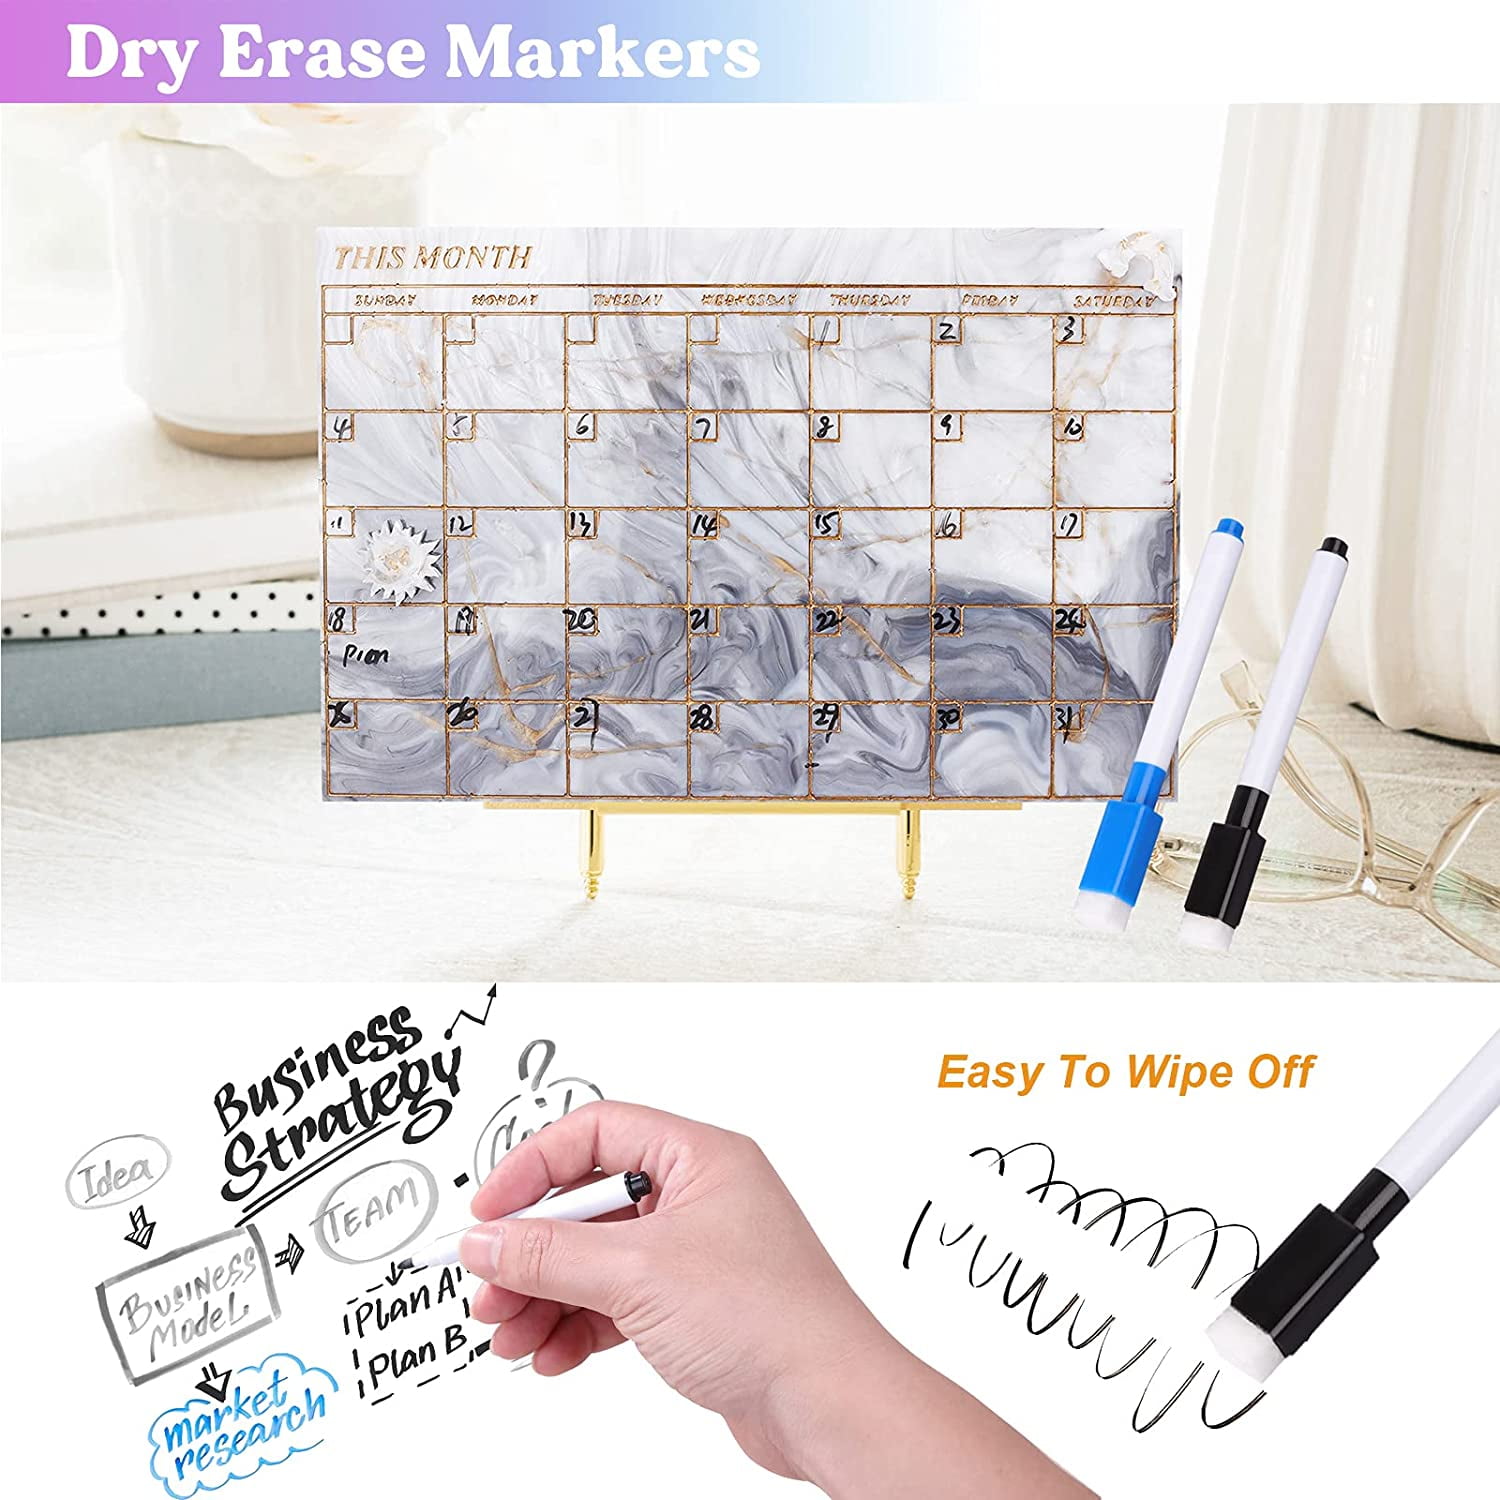 LET'S RESIN Calendar Resin Molds,2Pcs Weekly & Monthly Planner Silicone Molds for Epoxy Resin Casting,Dry Erase Makers,Cute Weather Pattern,for Resin Crafts,Unique Decoration,Recording Anniversary